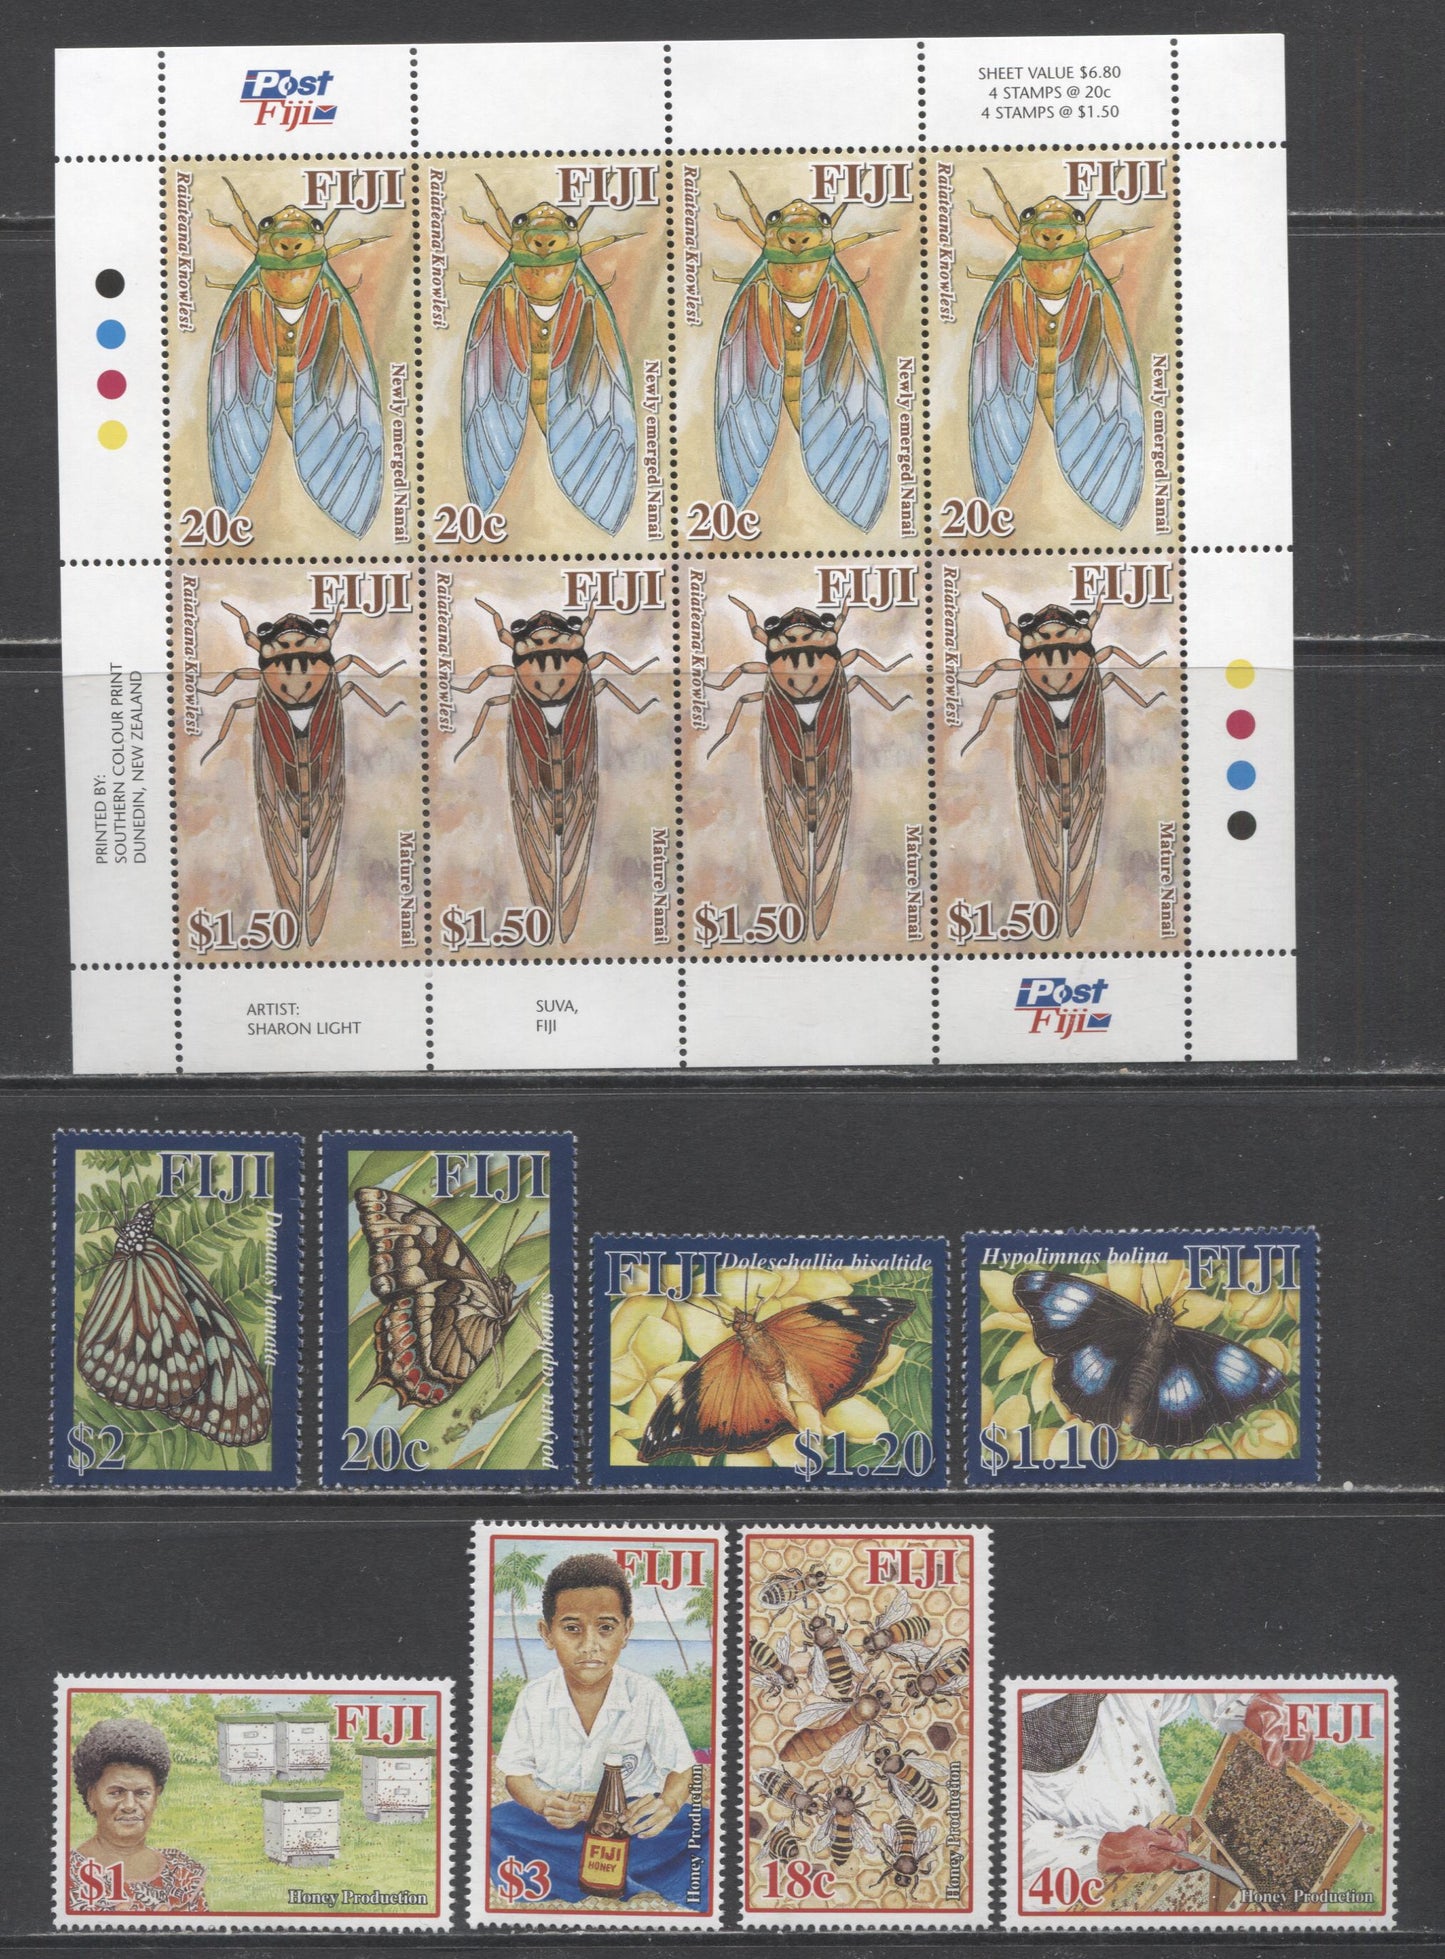 Lot 184 Fiji SC#1111/1242 2006-2010 Honey Production, Butterflies & Insect Issues, 9 VFNH Singles & Souvenir Sheet, Click on Listing to See ALL Pictures, 2017 Scott Cat. $20.5